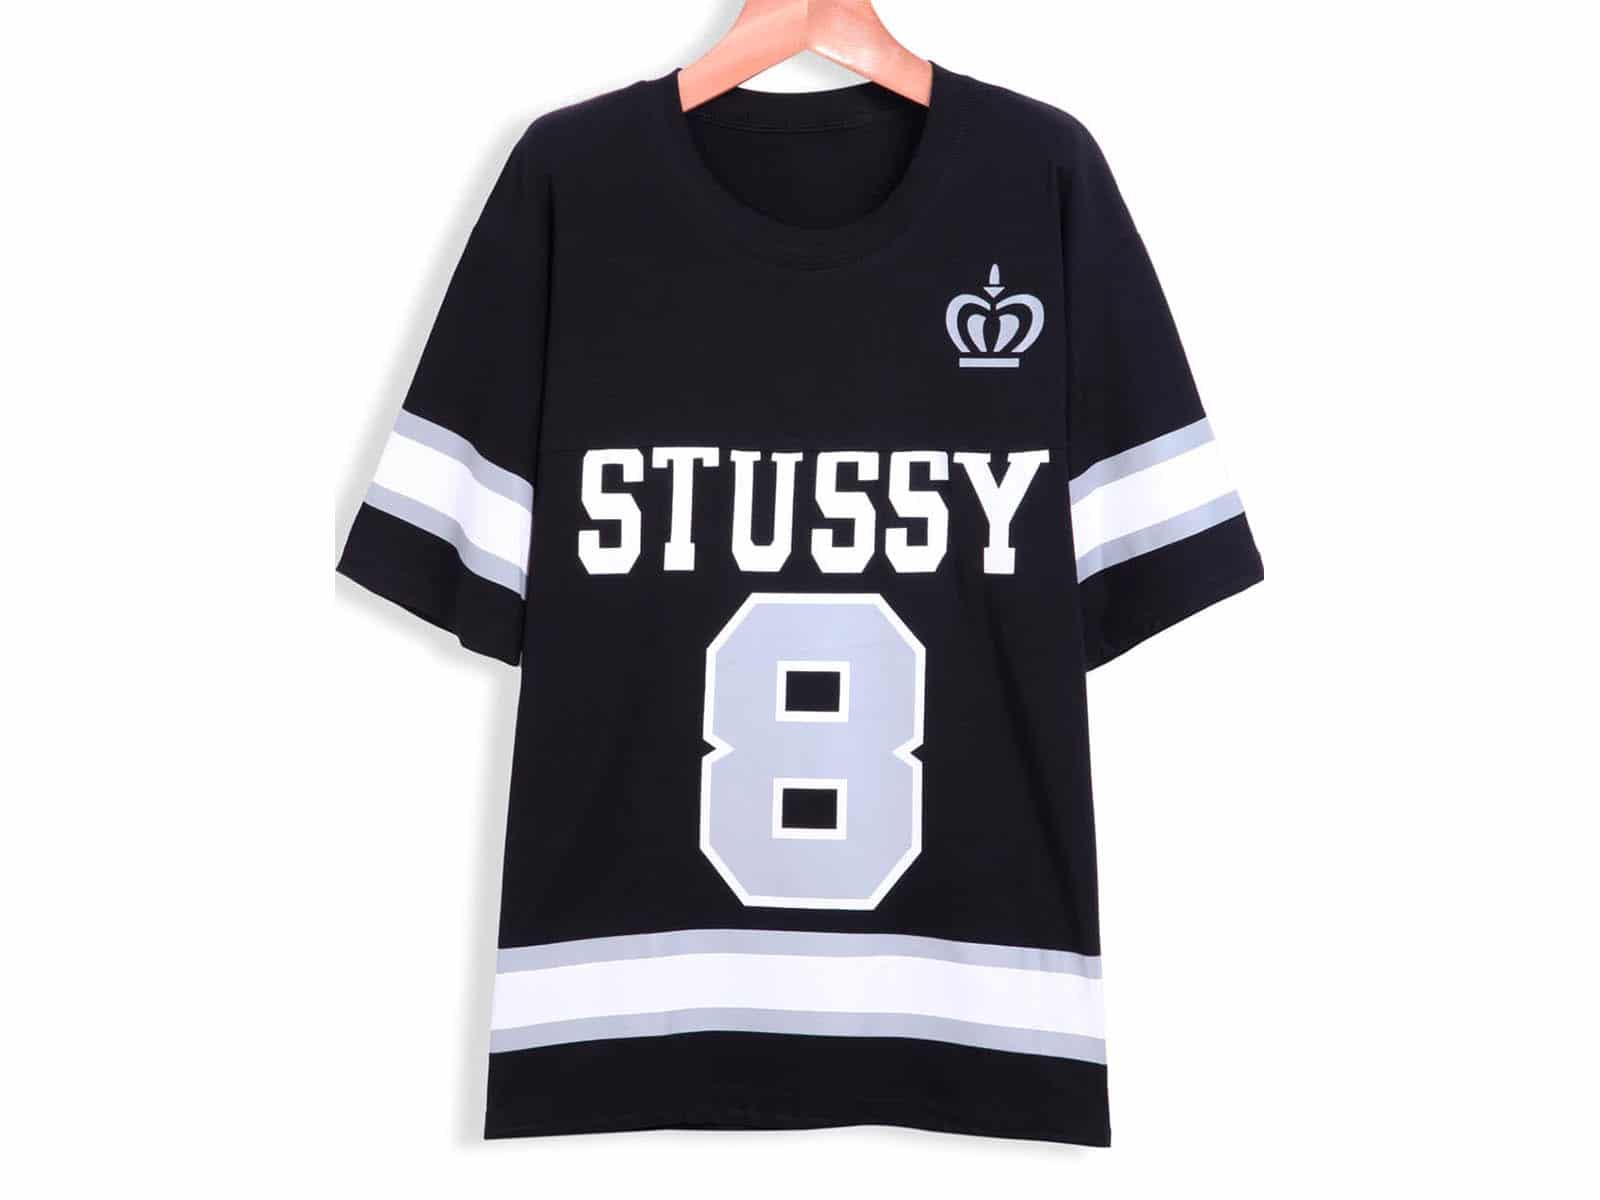 Shein has just counterfeited a Stüssy T-shirt